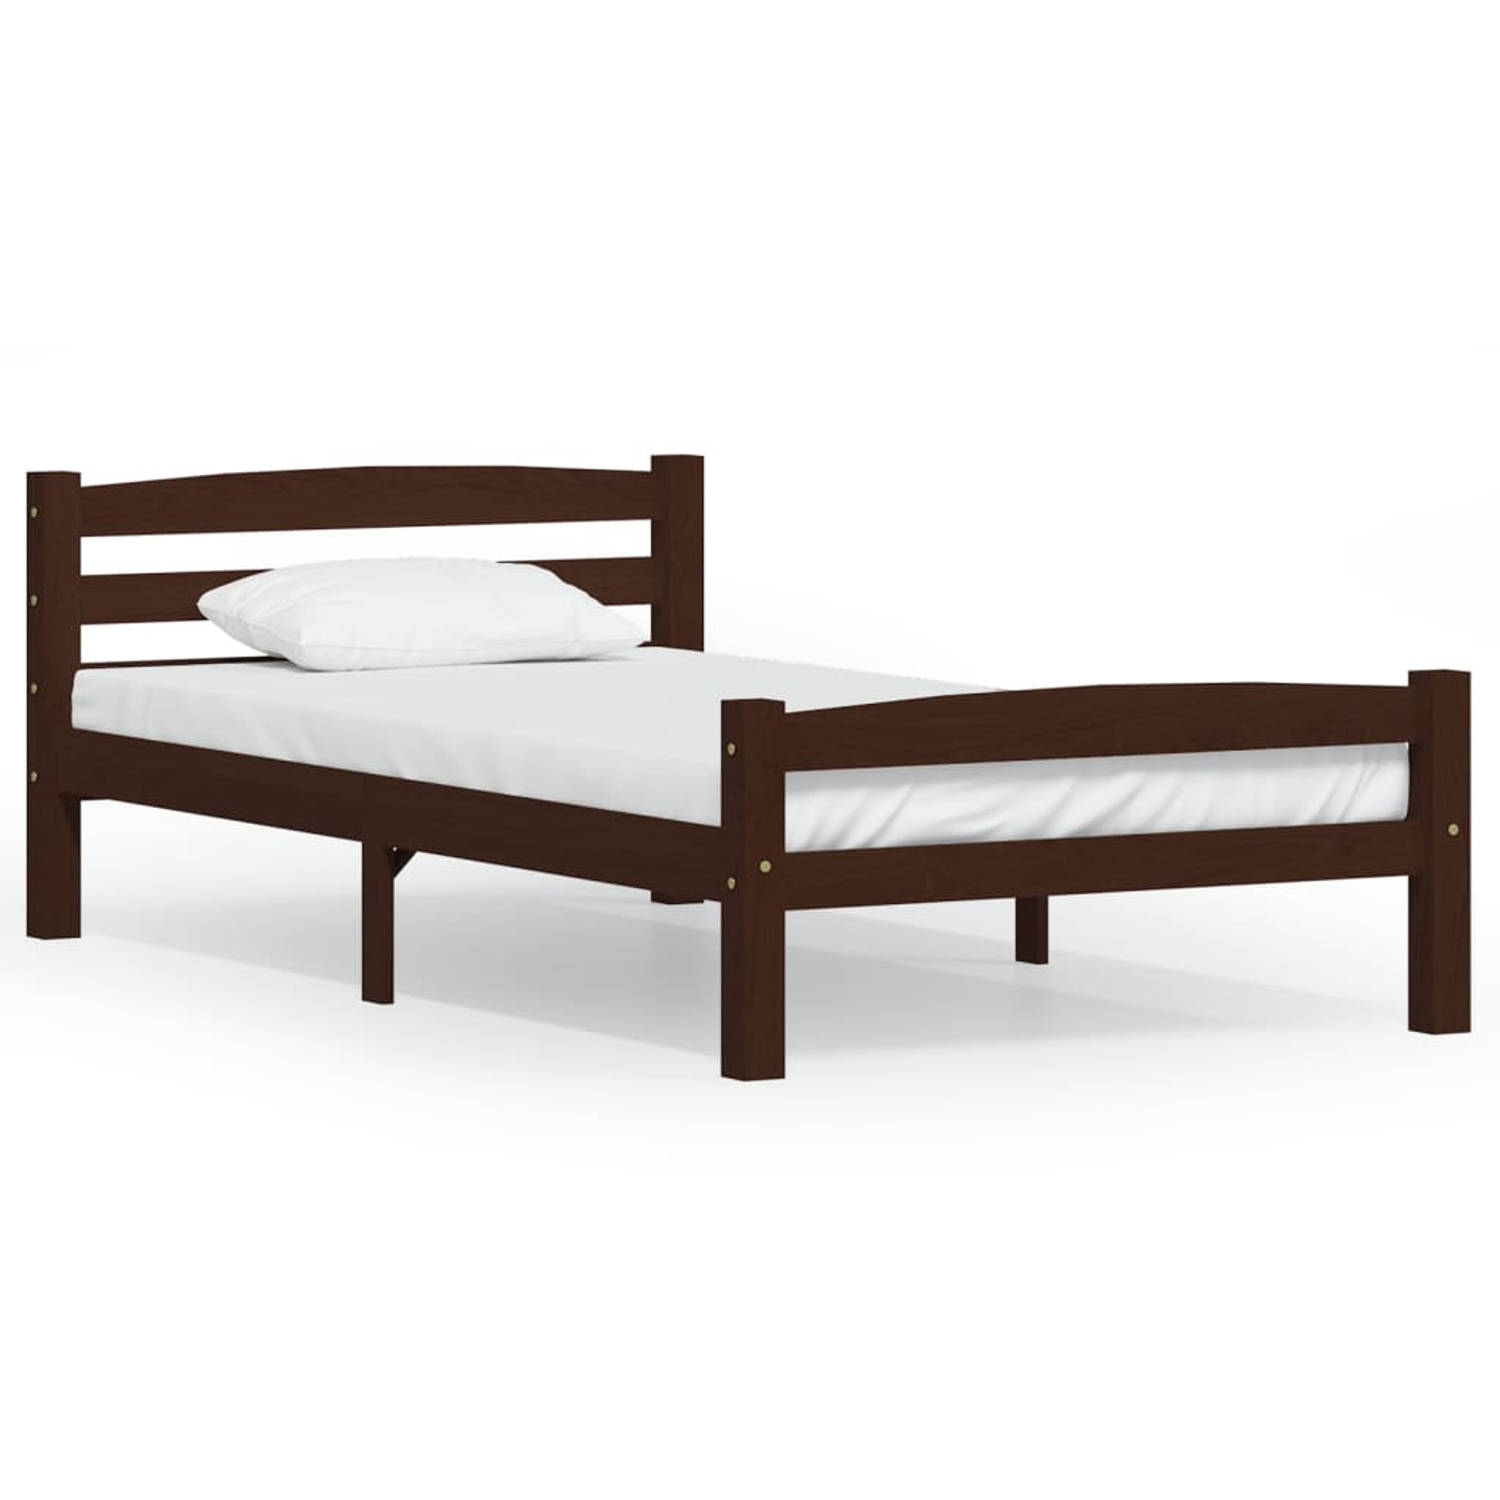 The Living Store Bedframe massief grenenhout donkerbruin 100x200 cm - Bedframe - Bedframe - Bed Frame - Bed Frames - Bed - Bedden - 1-persoonsbed - 1-persoonsbedden - Eenpersoons B